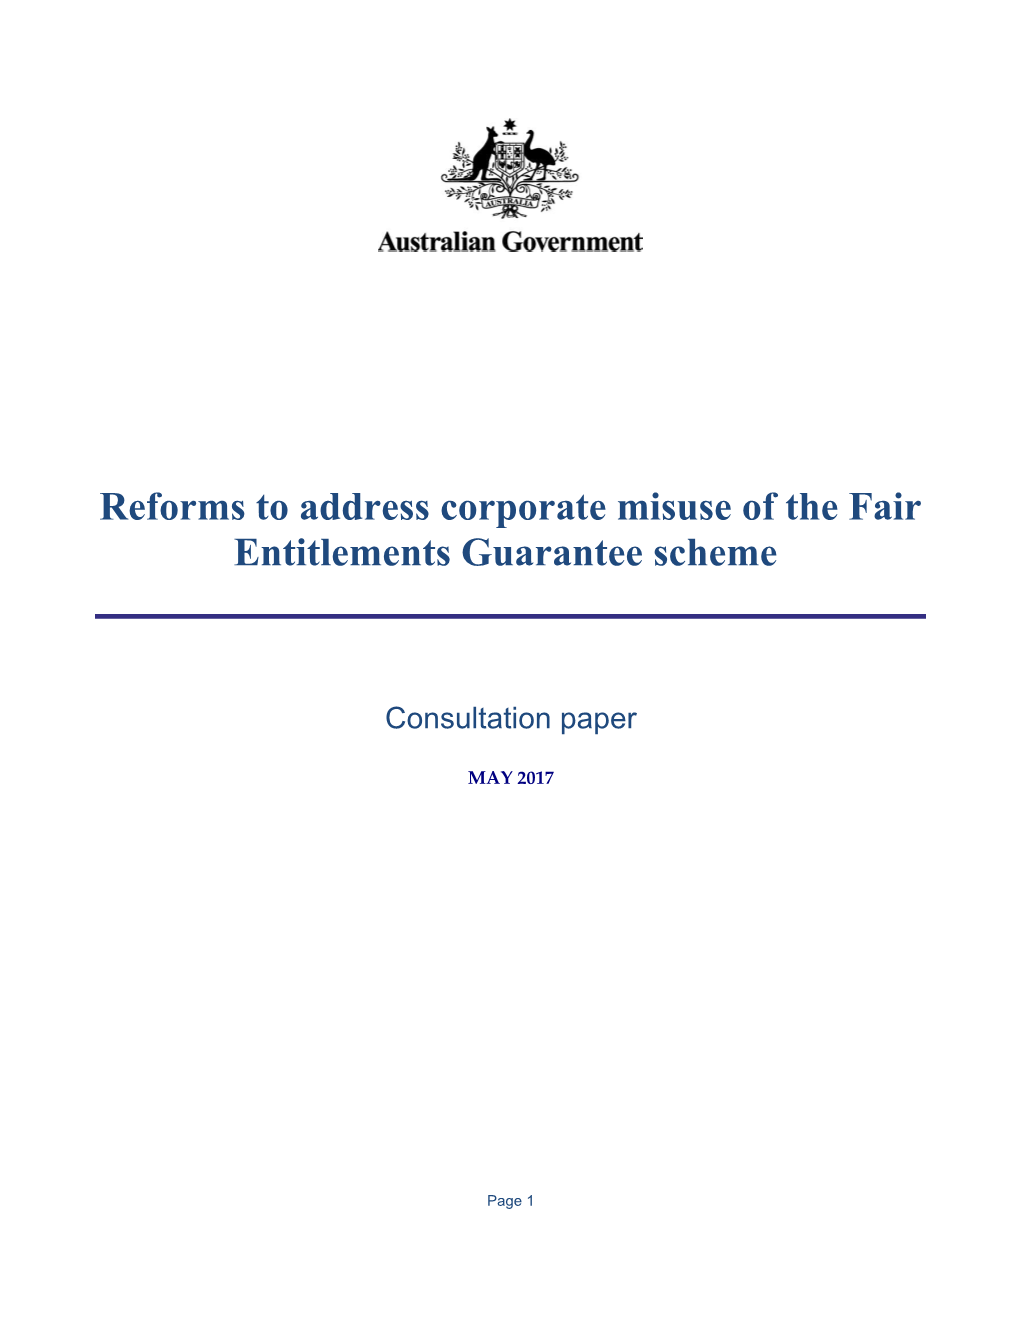 Reforms to Address Corporate Misuse of the Fair Entitlements Guarantee Scheme